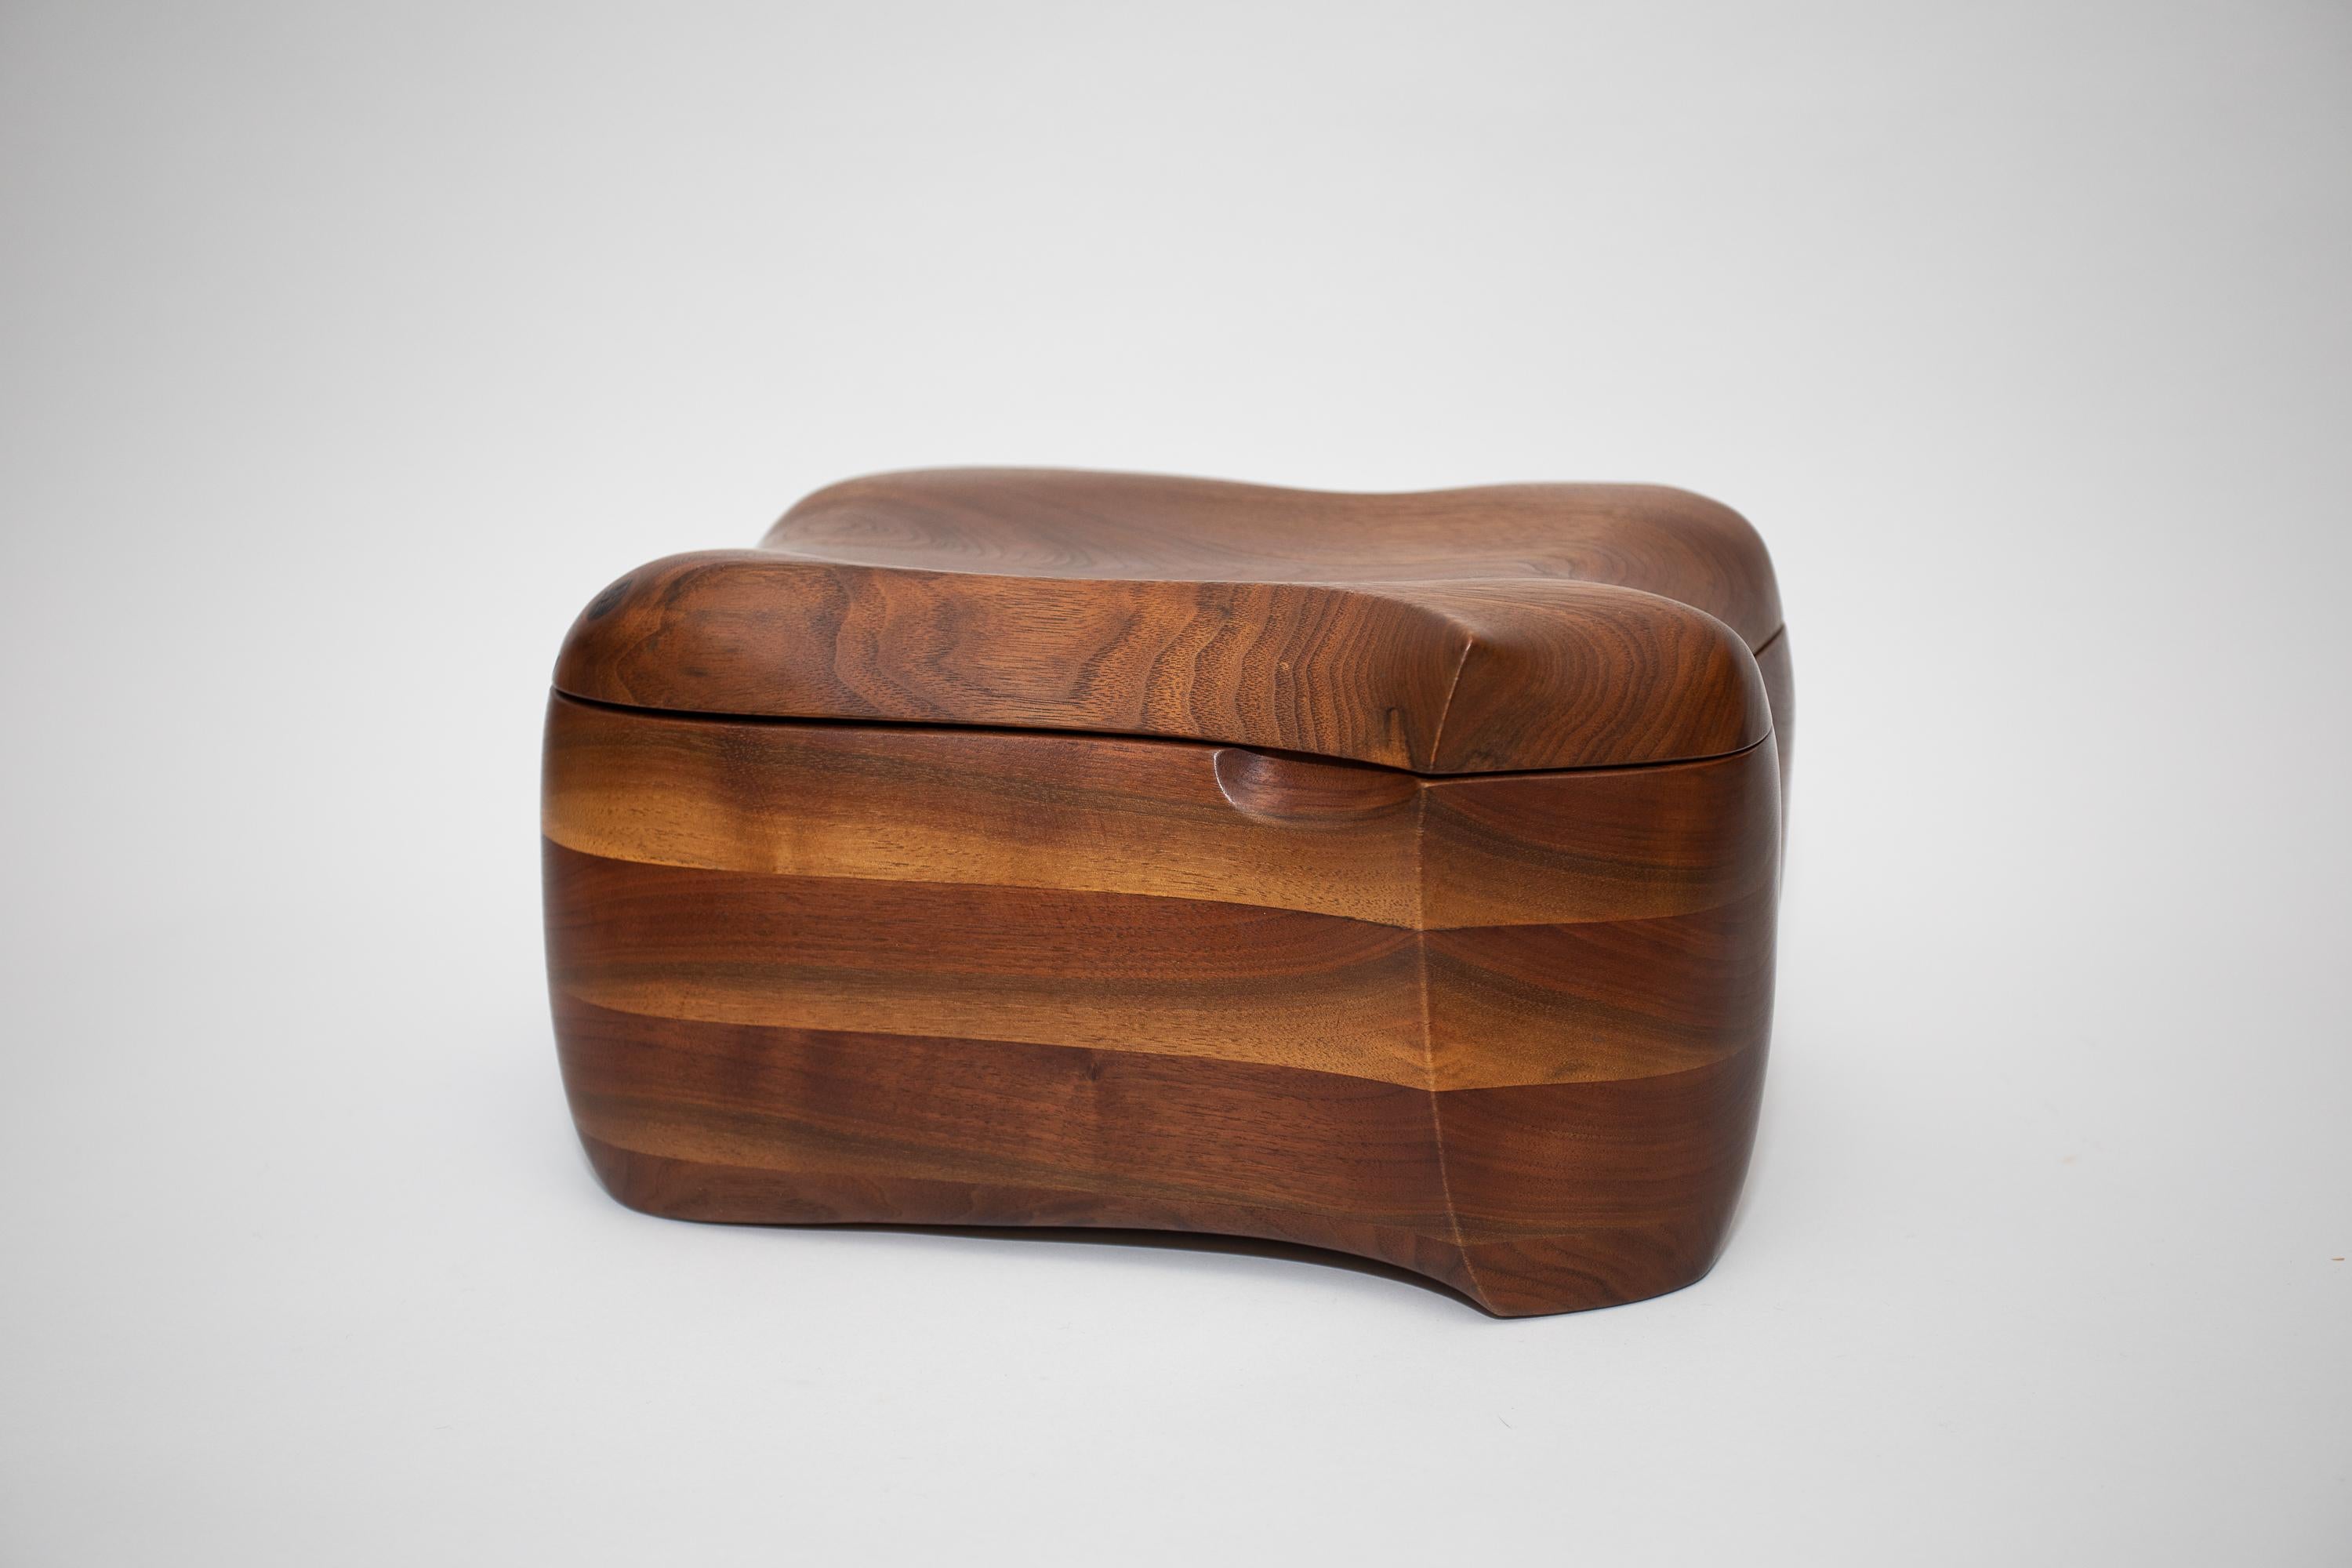 A great organic shaped  Box 
Integrated carved interior tray
Beautiful wood selection
A large organic example of American Craft
